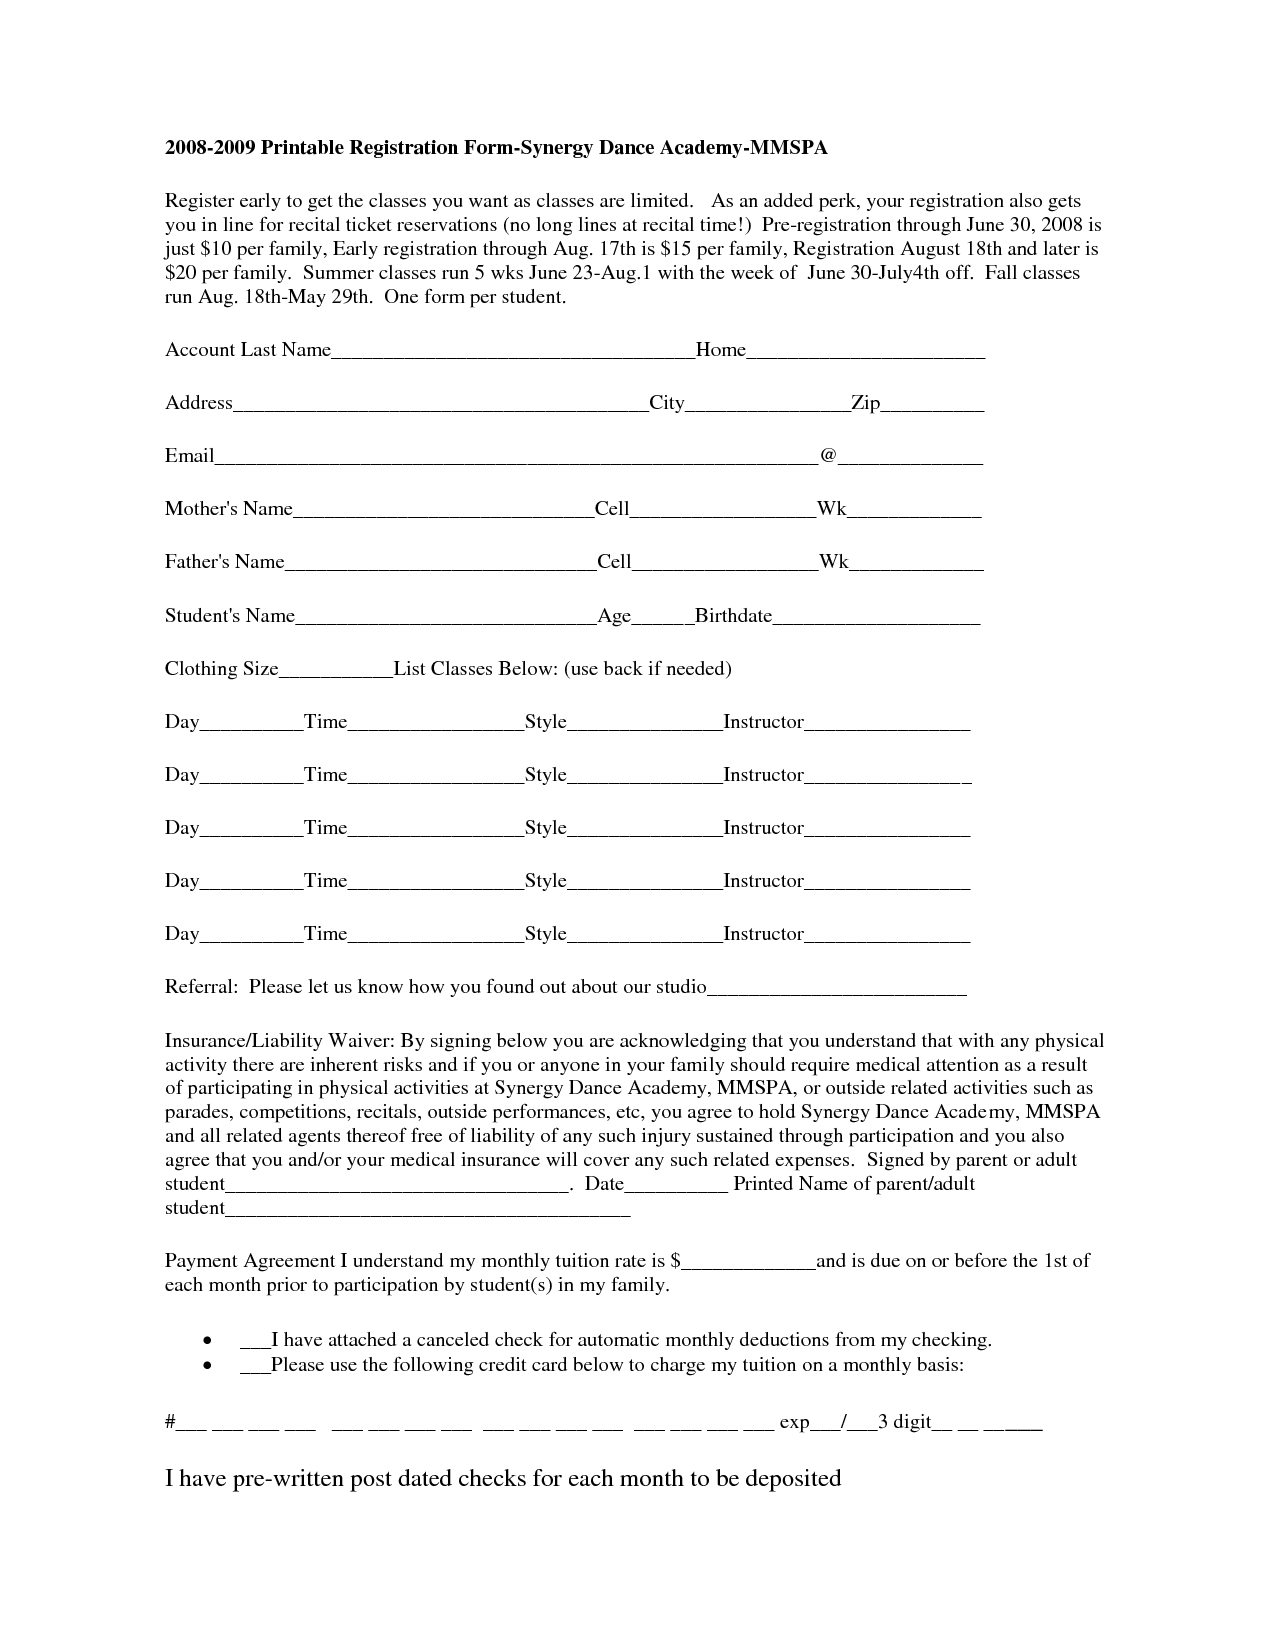 Registration Forms Template Free | charlotte clergy coalition